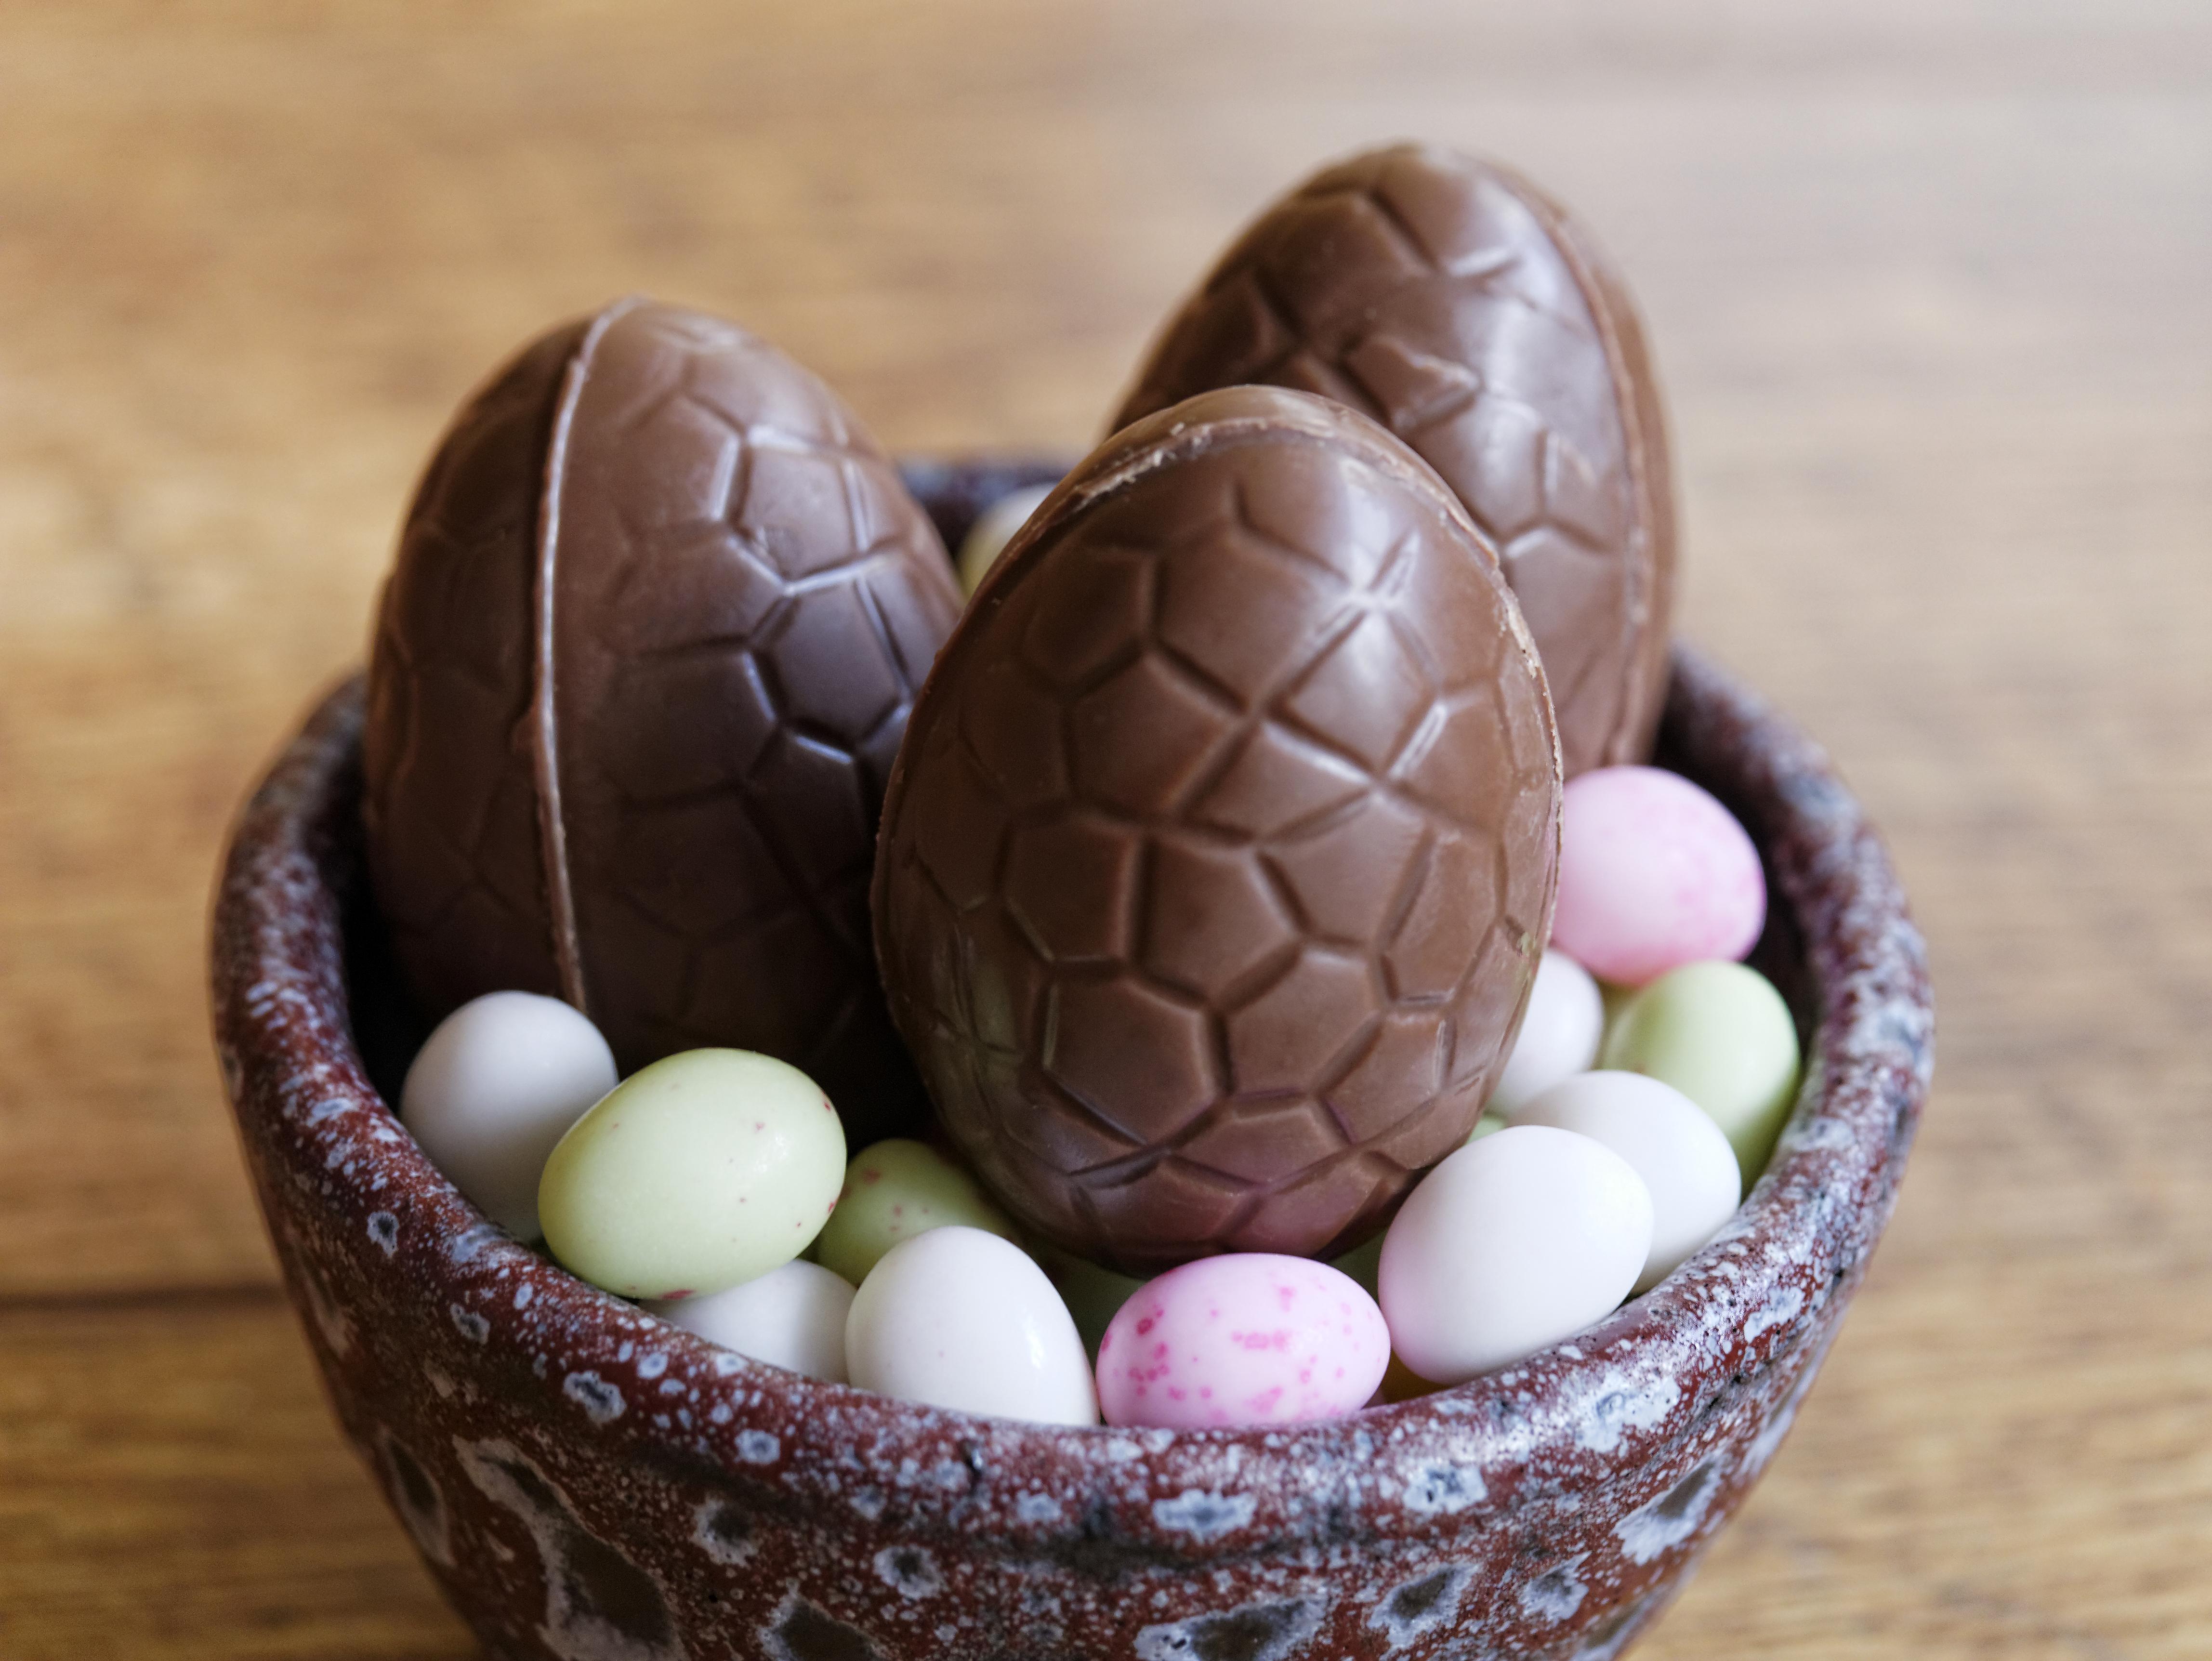 Chocolate Easter eggs in a basket - Happy Spring Holiday.